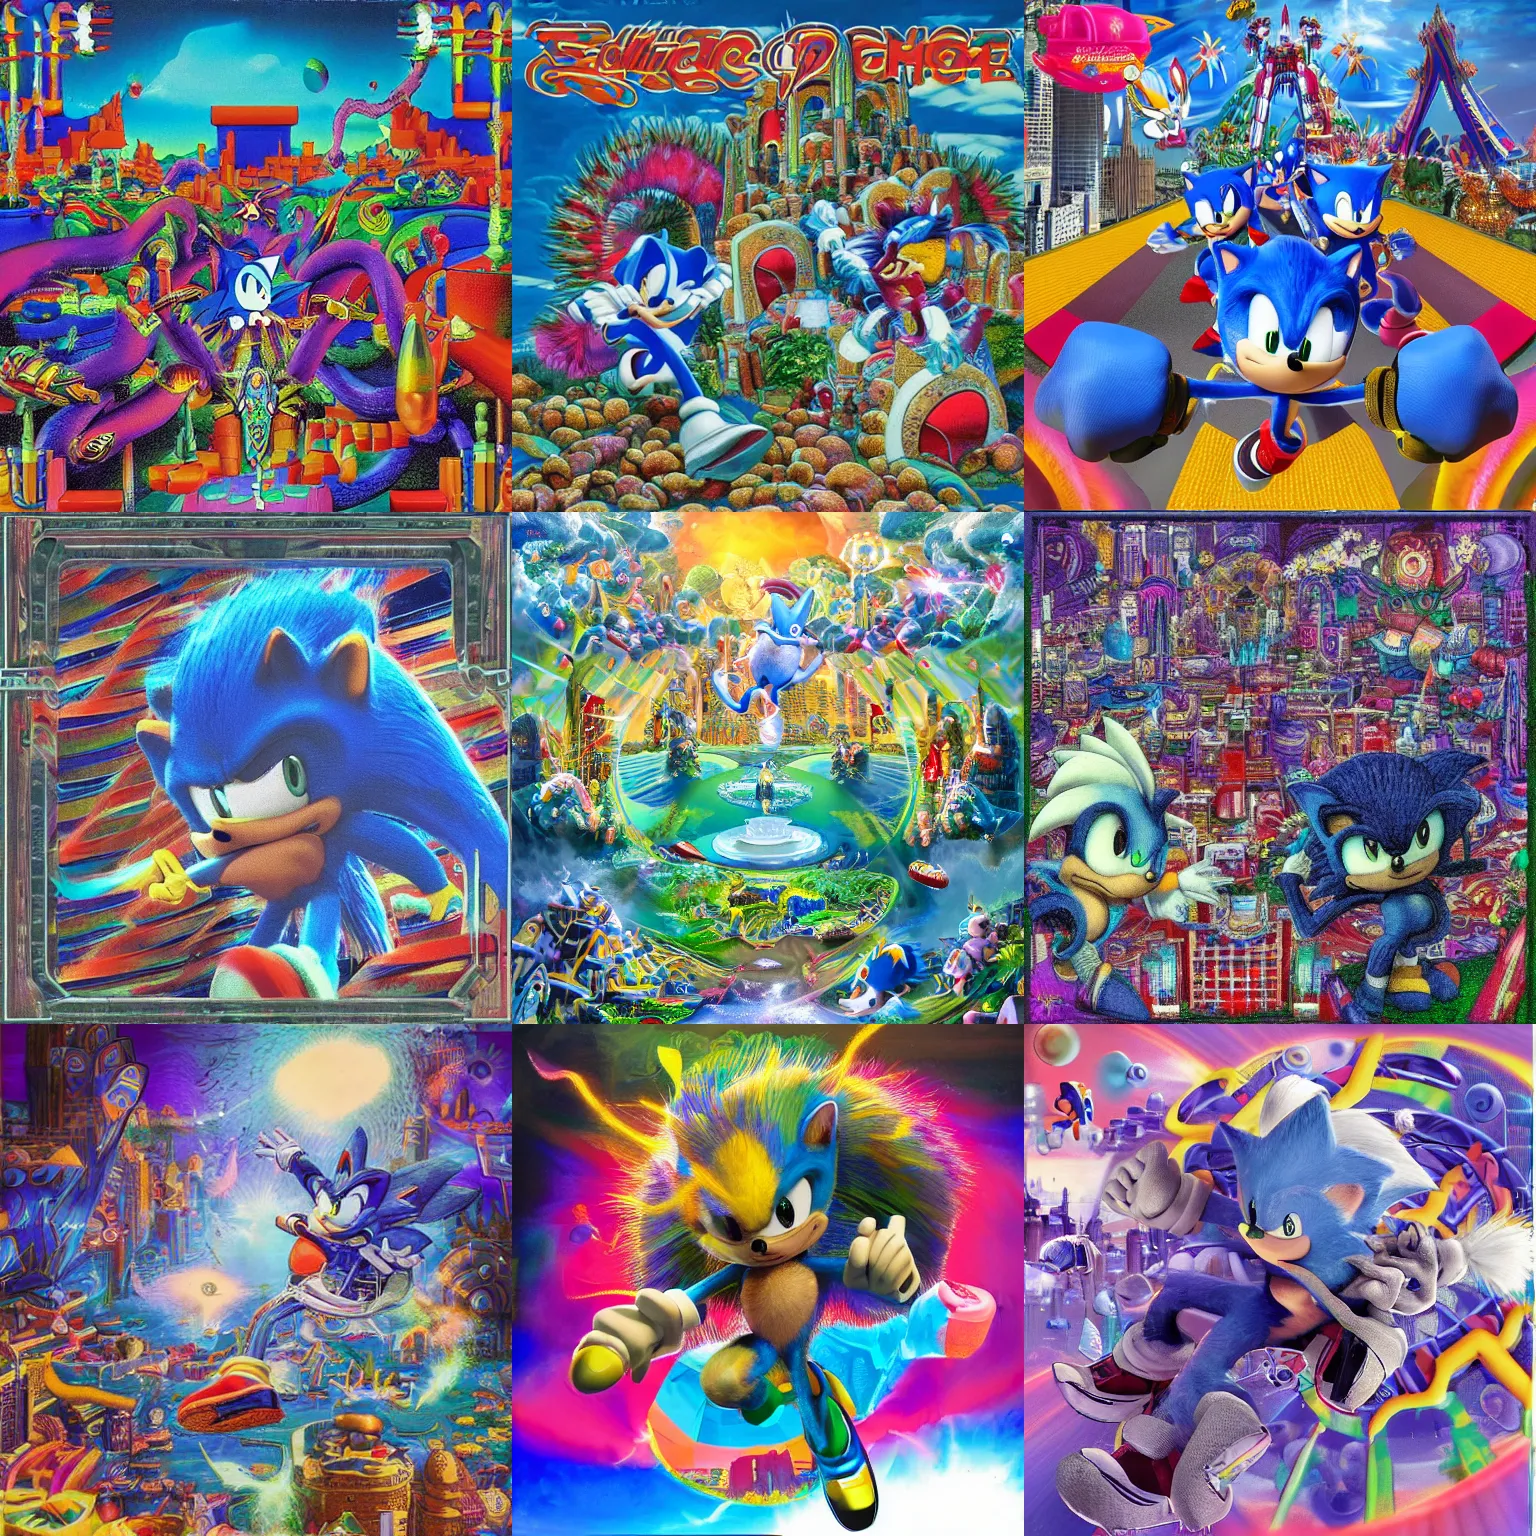 Prompt: sonic the hedgehog in a surreal, soft, detailed professional, high quality airbrush art mgmt shpongle album cover of a chrome dissolving LSD DMT blue sonic the hedgehog falling through a vaporwave sci-fi city, checkerboard horizon, rings, 1990s 1992 Sega Genesis video game album cover